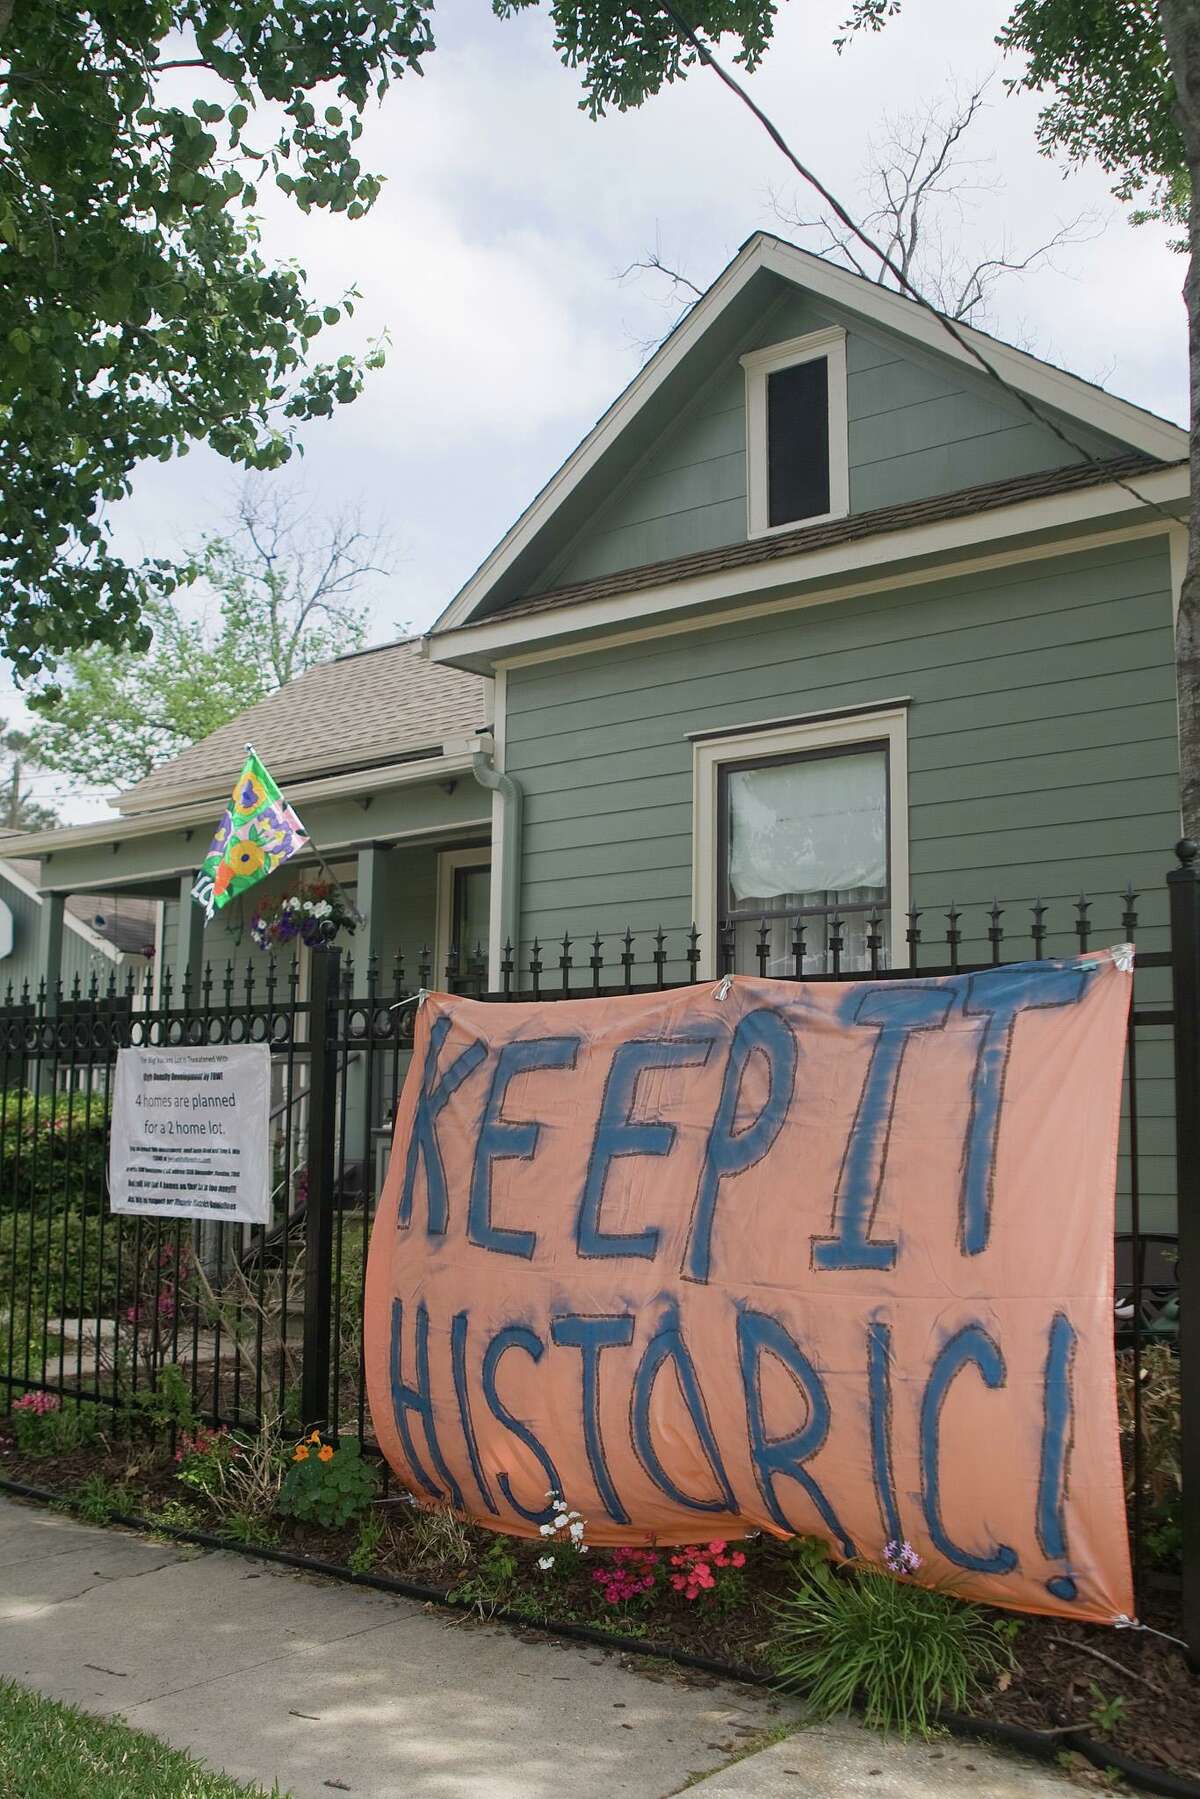 Signs protesting the proposed construction of 4 homes on a double-sized lot at 15th and Rutledge in the Heights Historic District are attached to walls, fences, and stands around the area. Photo by R. Clayton McKee